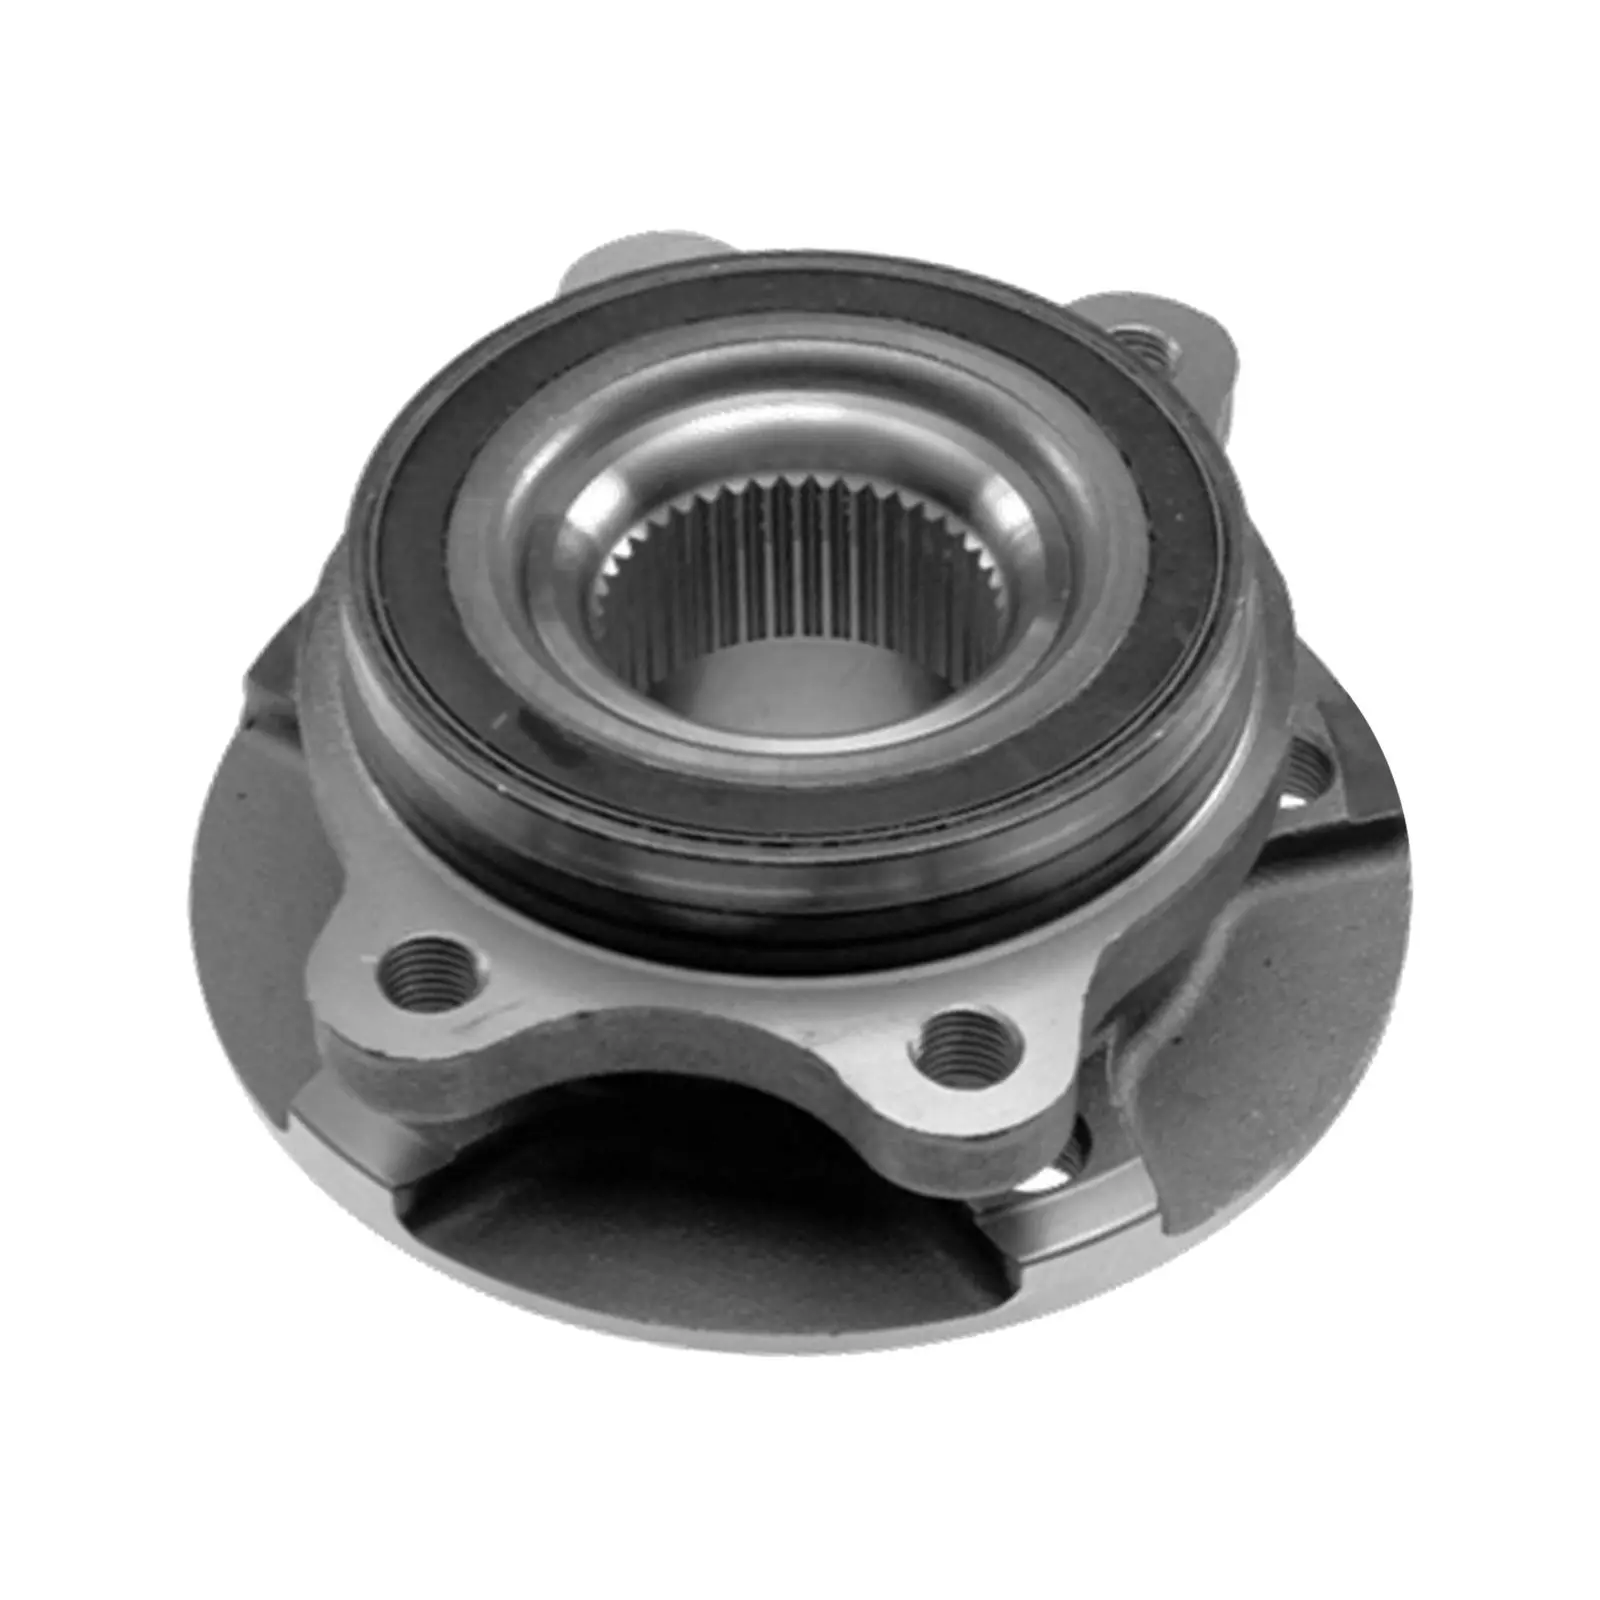 Left or Right Front Wheel Bearing Hub Assembly, Fit for Audi A4, 2009-2015 A5 2010-2014 2012-2015 Q5 2009-2015 S4 S5 2008-2015